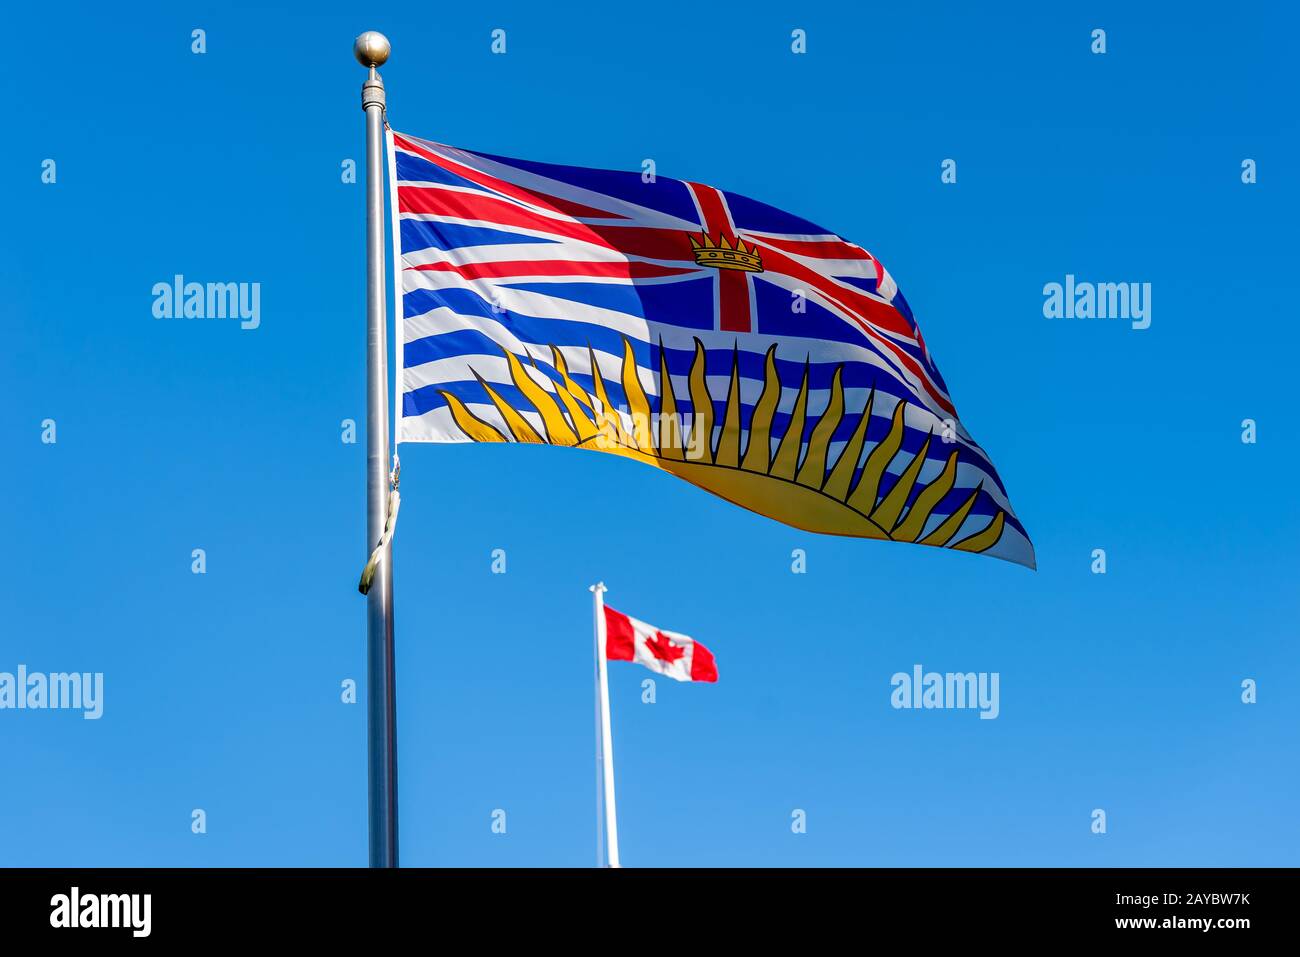 British Columbia flag flying with Canadian flag in background on a sunny day with blue sky Stock Photo